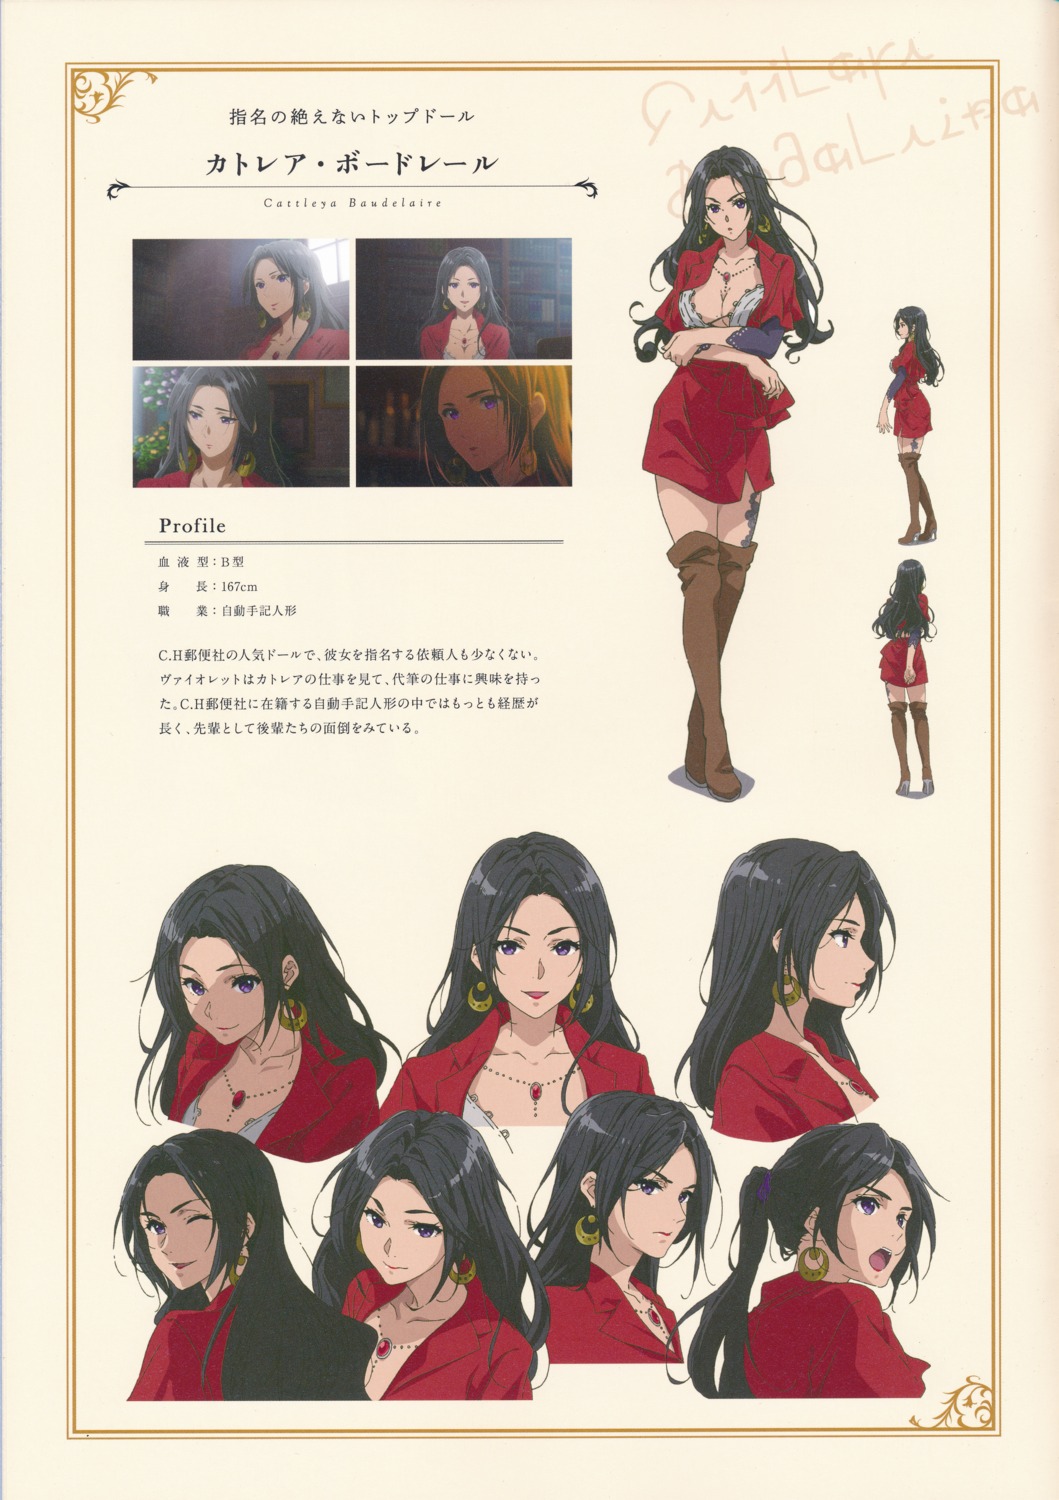 cattleya_baudelaire character_design cleavage expression no_bra profile_page takase_akiko violet_evergarden